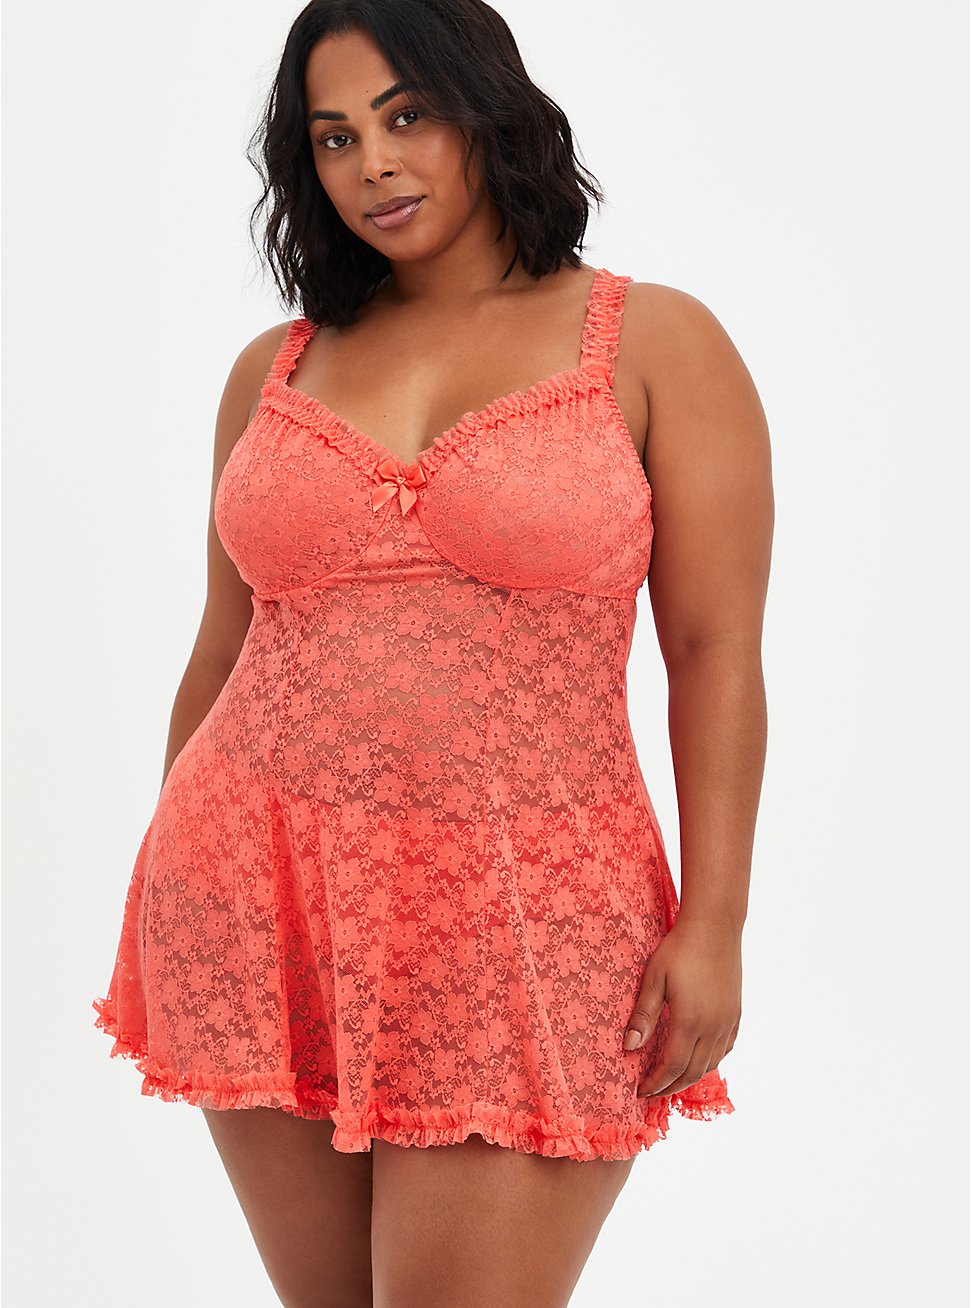 Underwire Unlined Babydoll - Lace Coral, CORAL, hi-res